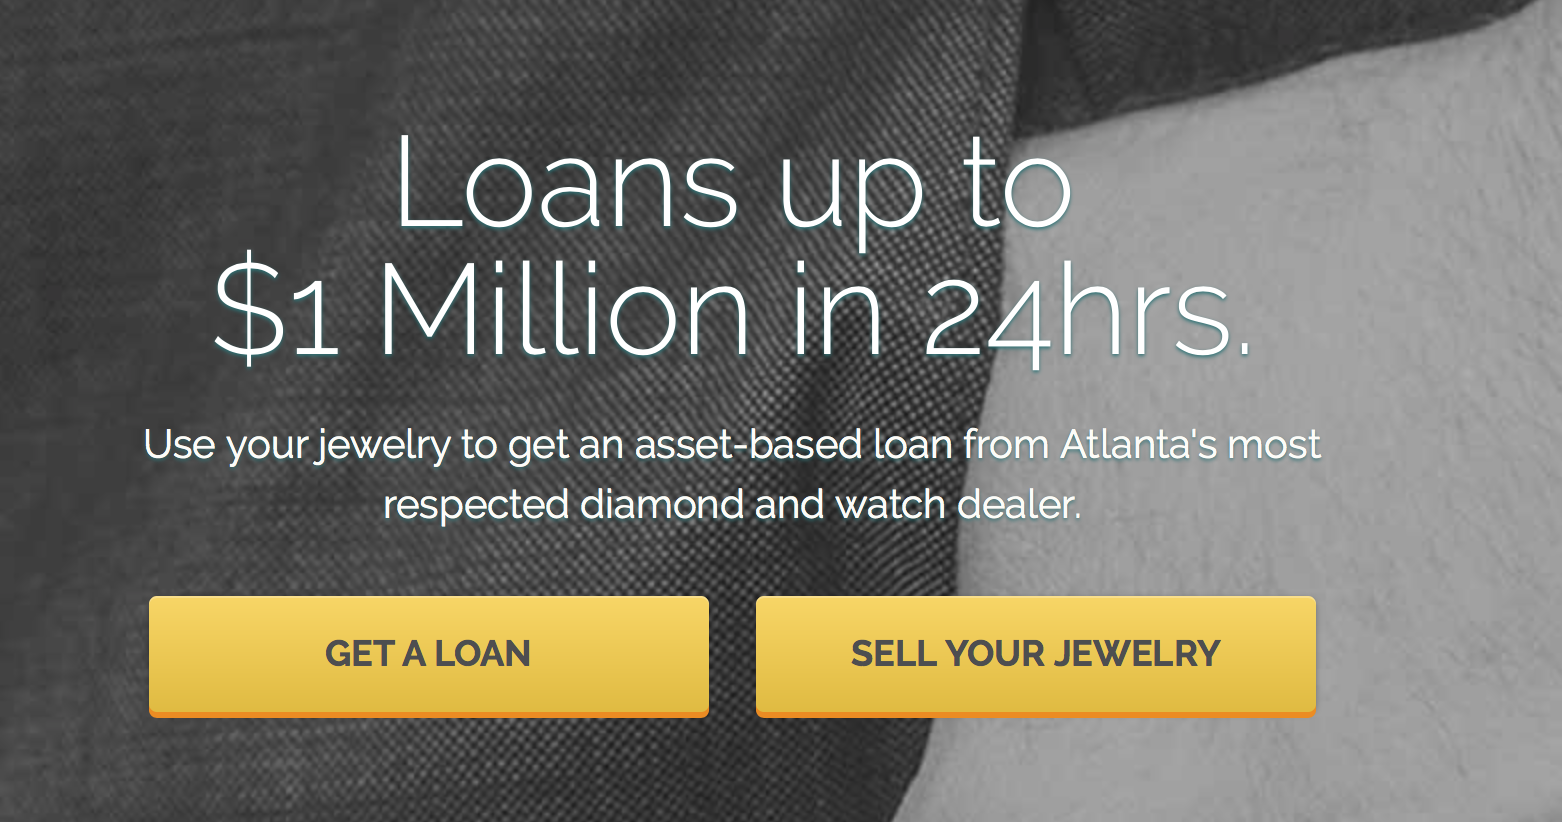 Fill out the online form to receive up to $1 million in 24 hours in Atlanta